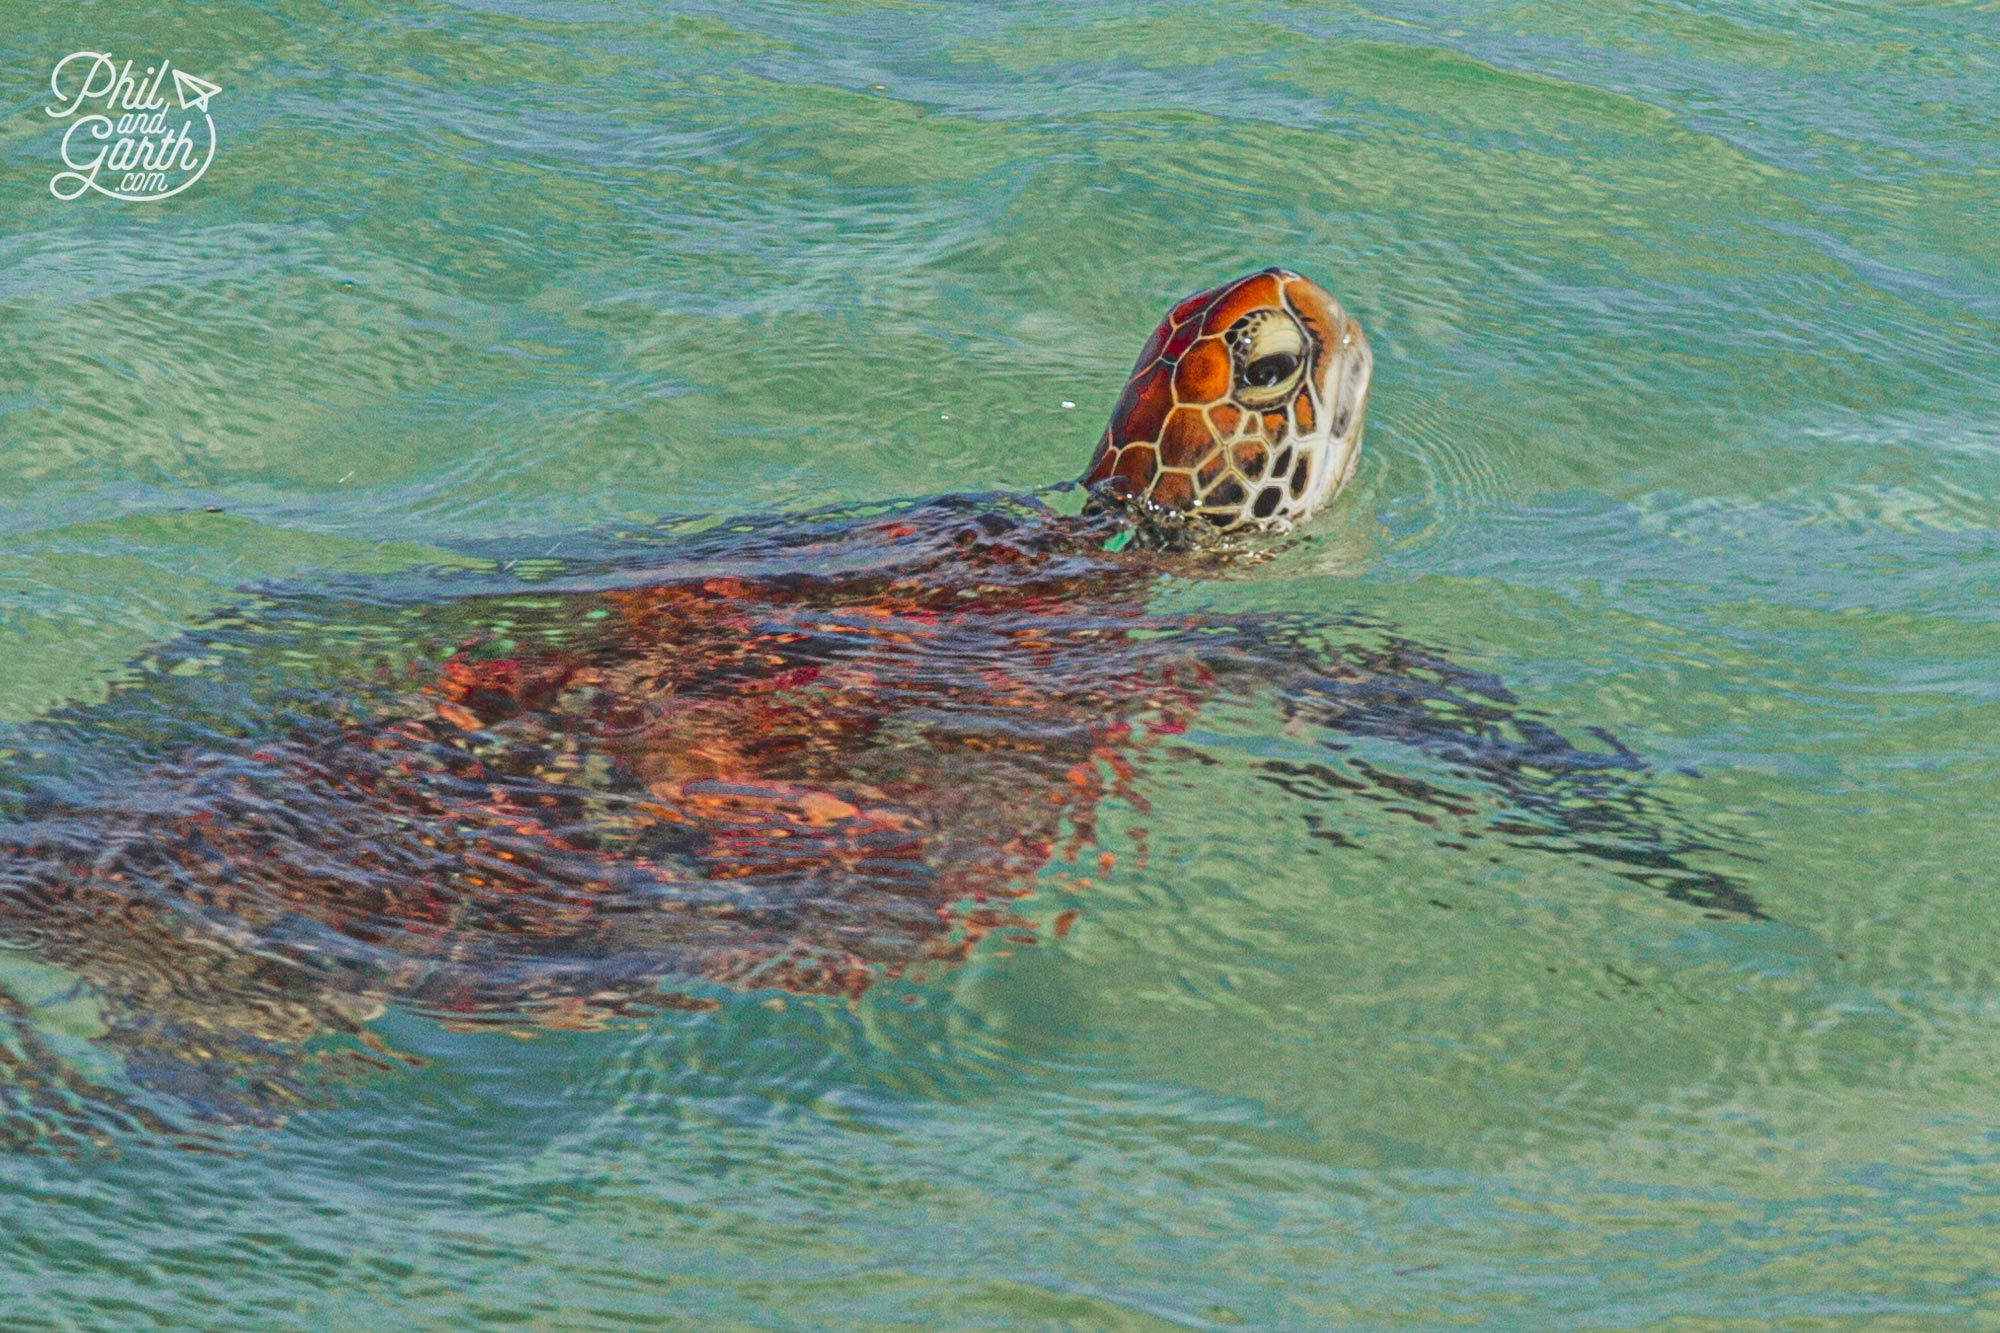 A green turtle pops up his head, there's large population of turtles here